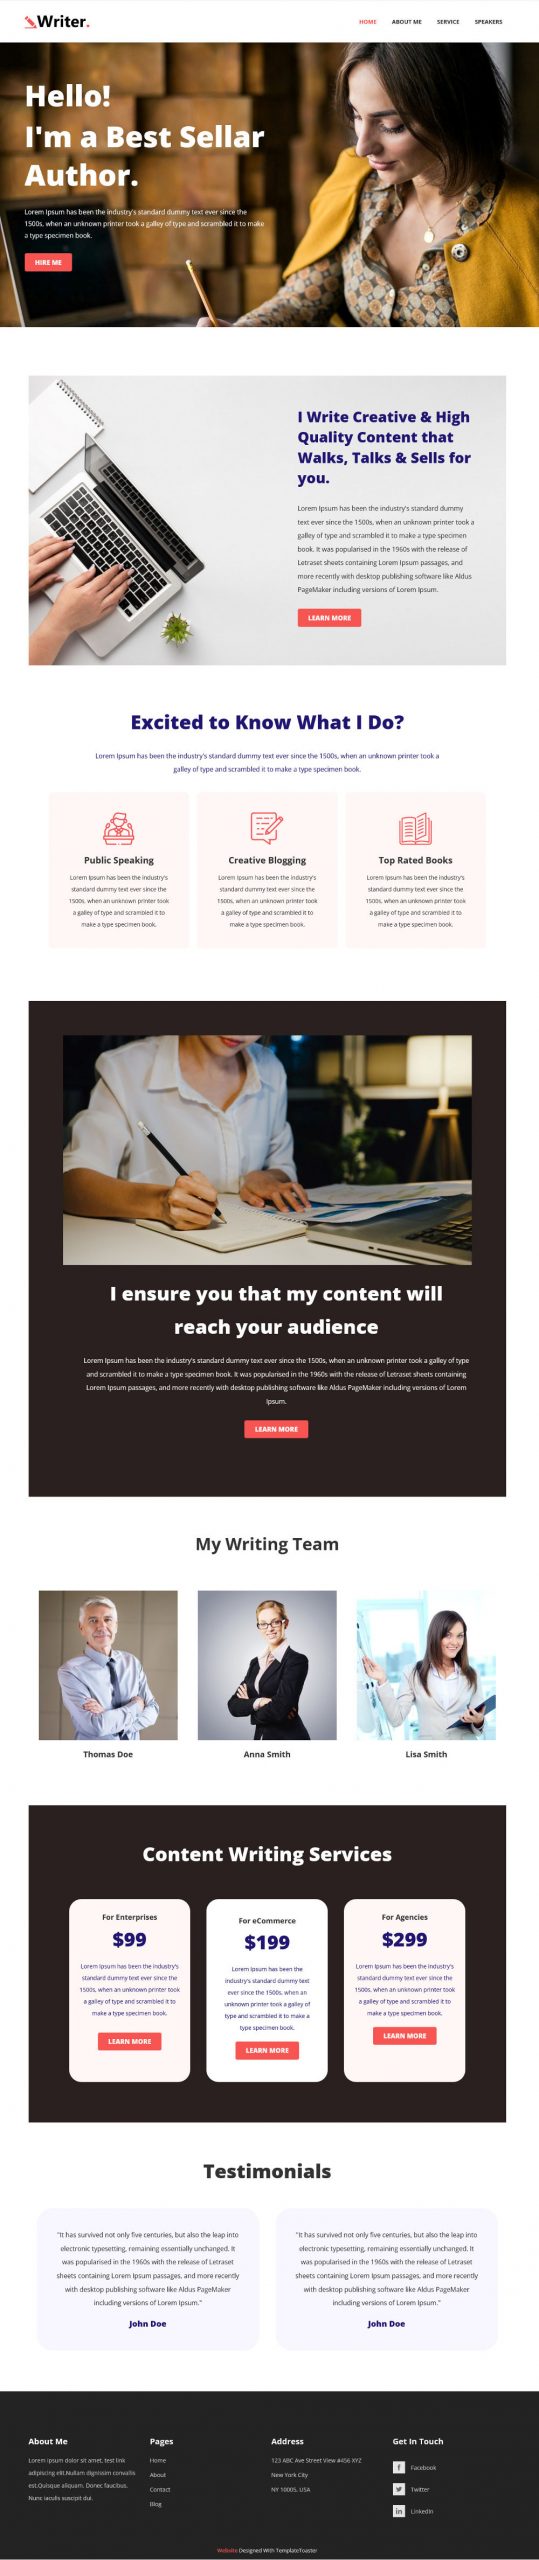 writer - writers and journalist personal website template